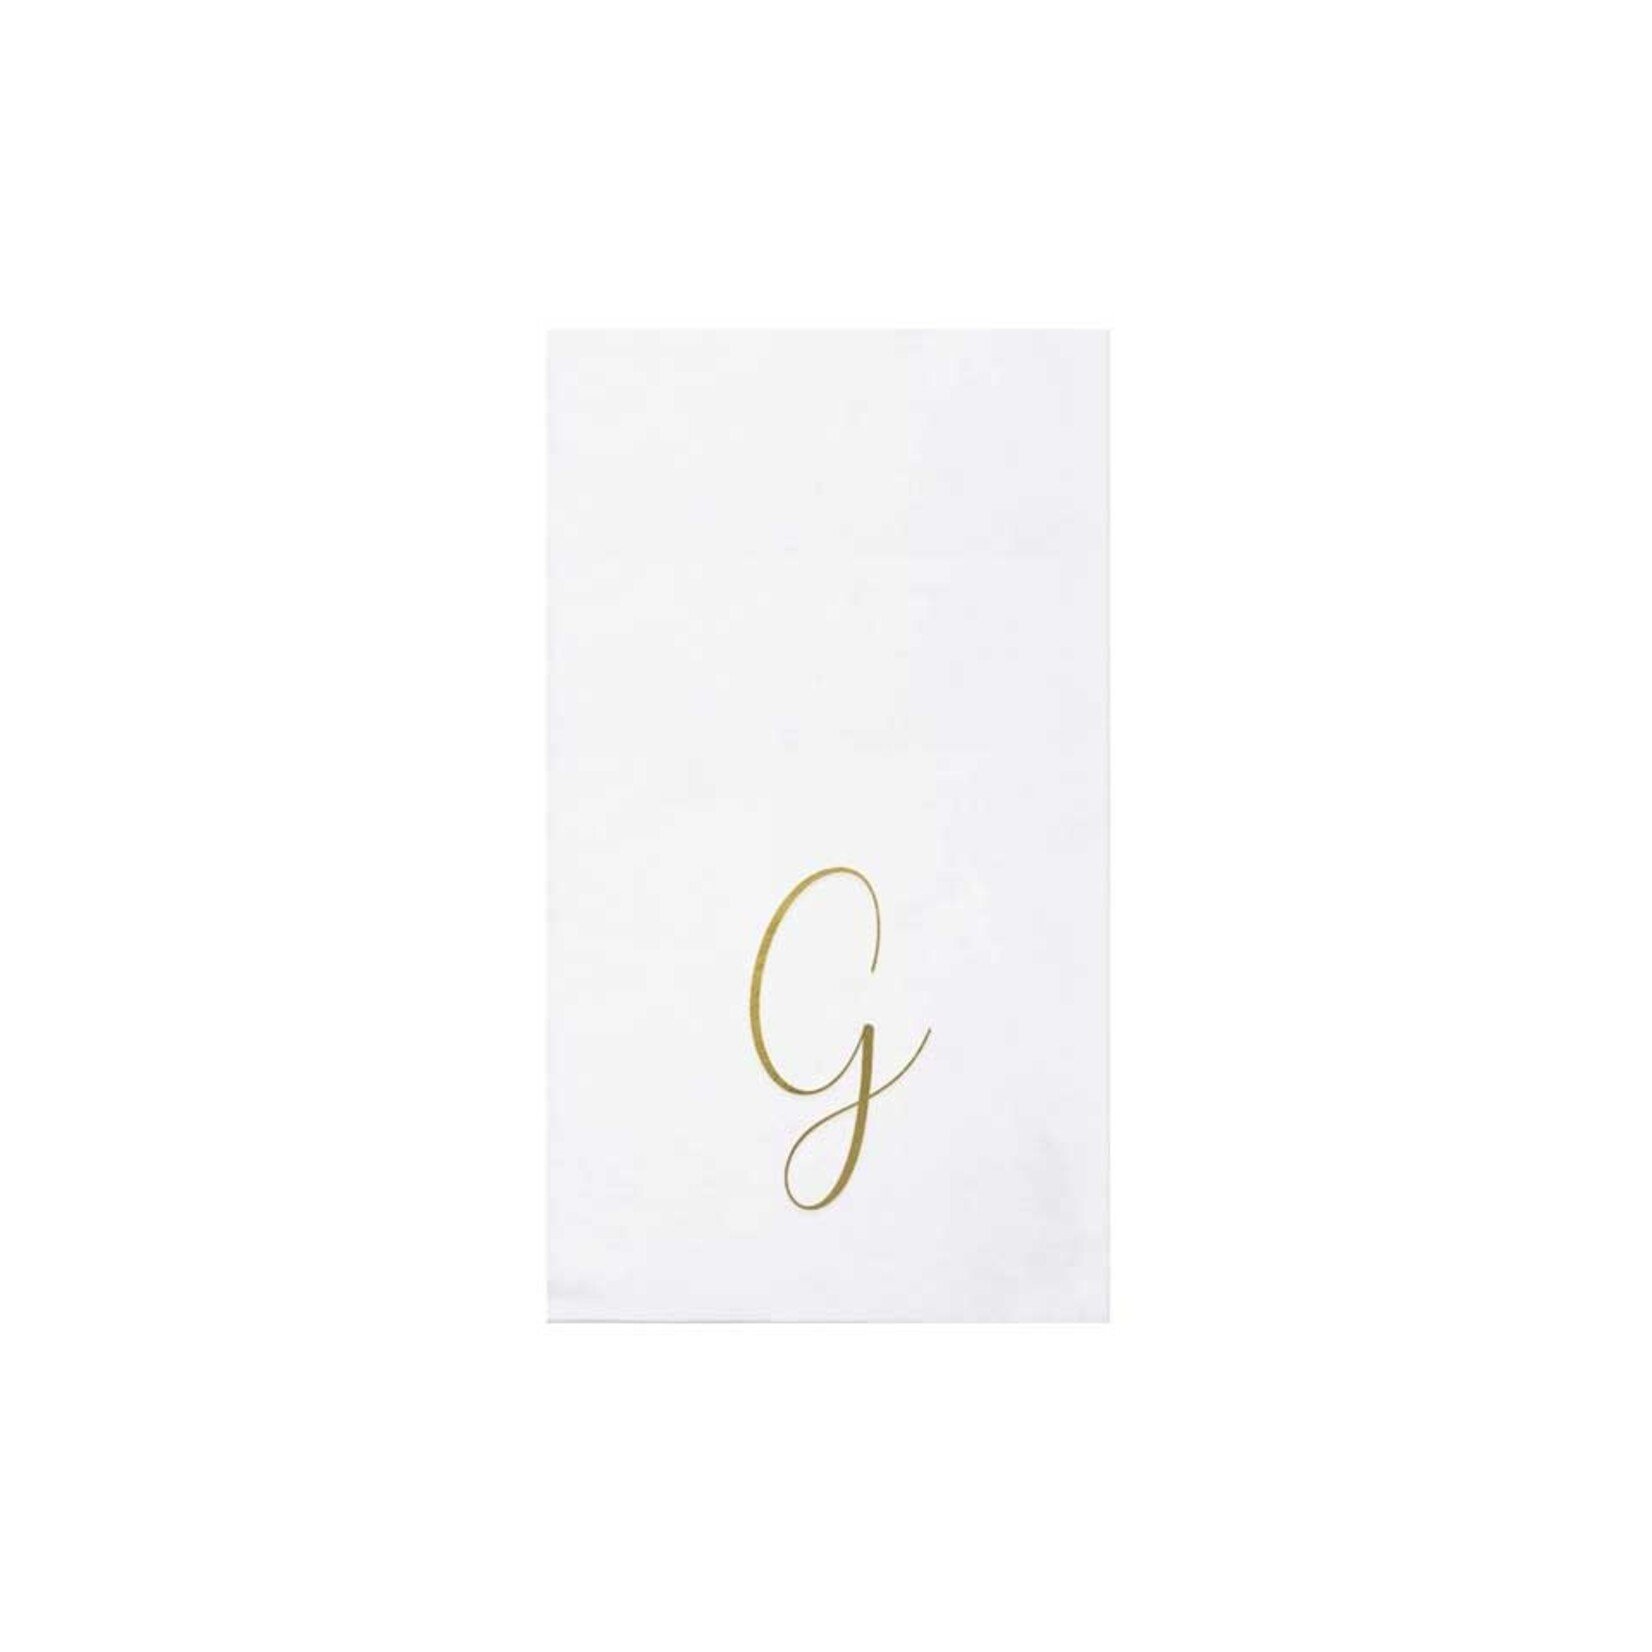 VIETRI Papersoft Napkins Gold Monogram Guest Towels - G (Pack of 20)